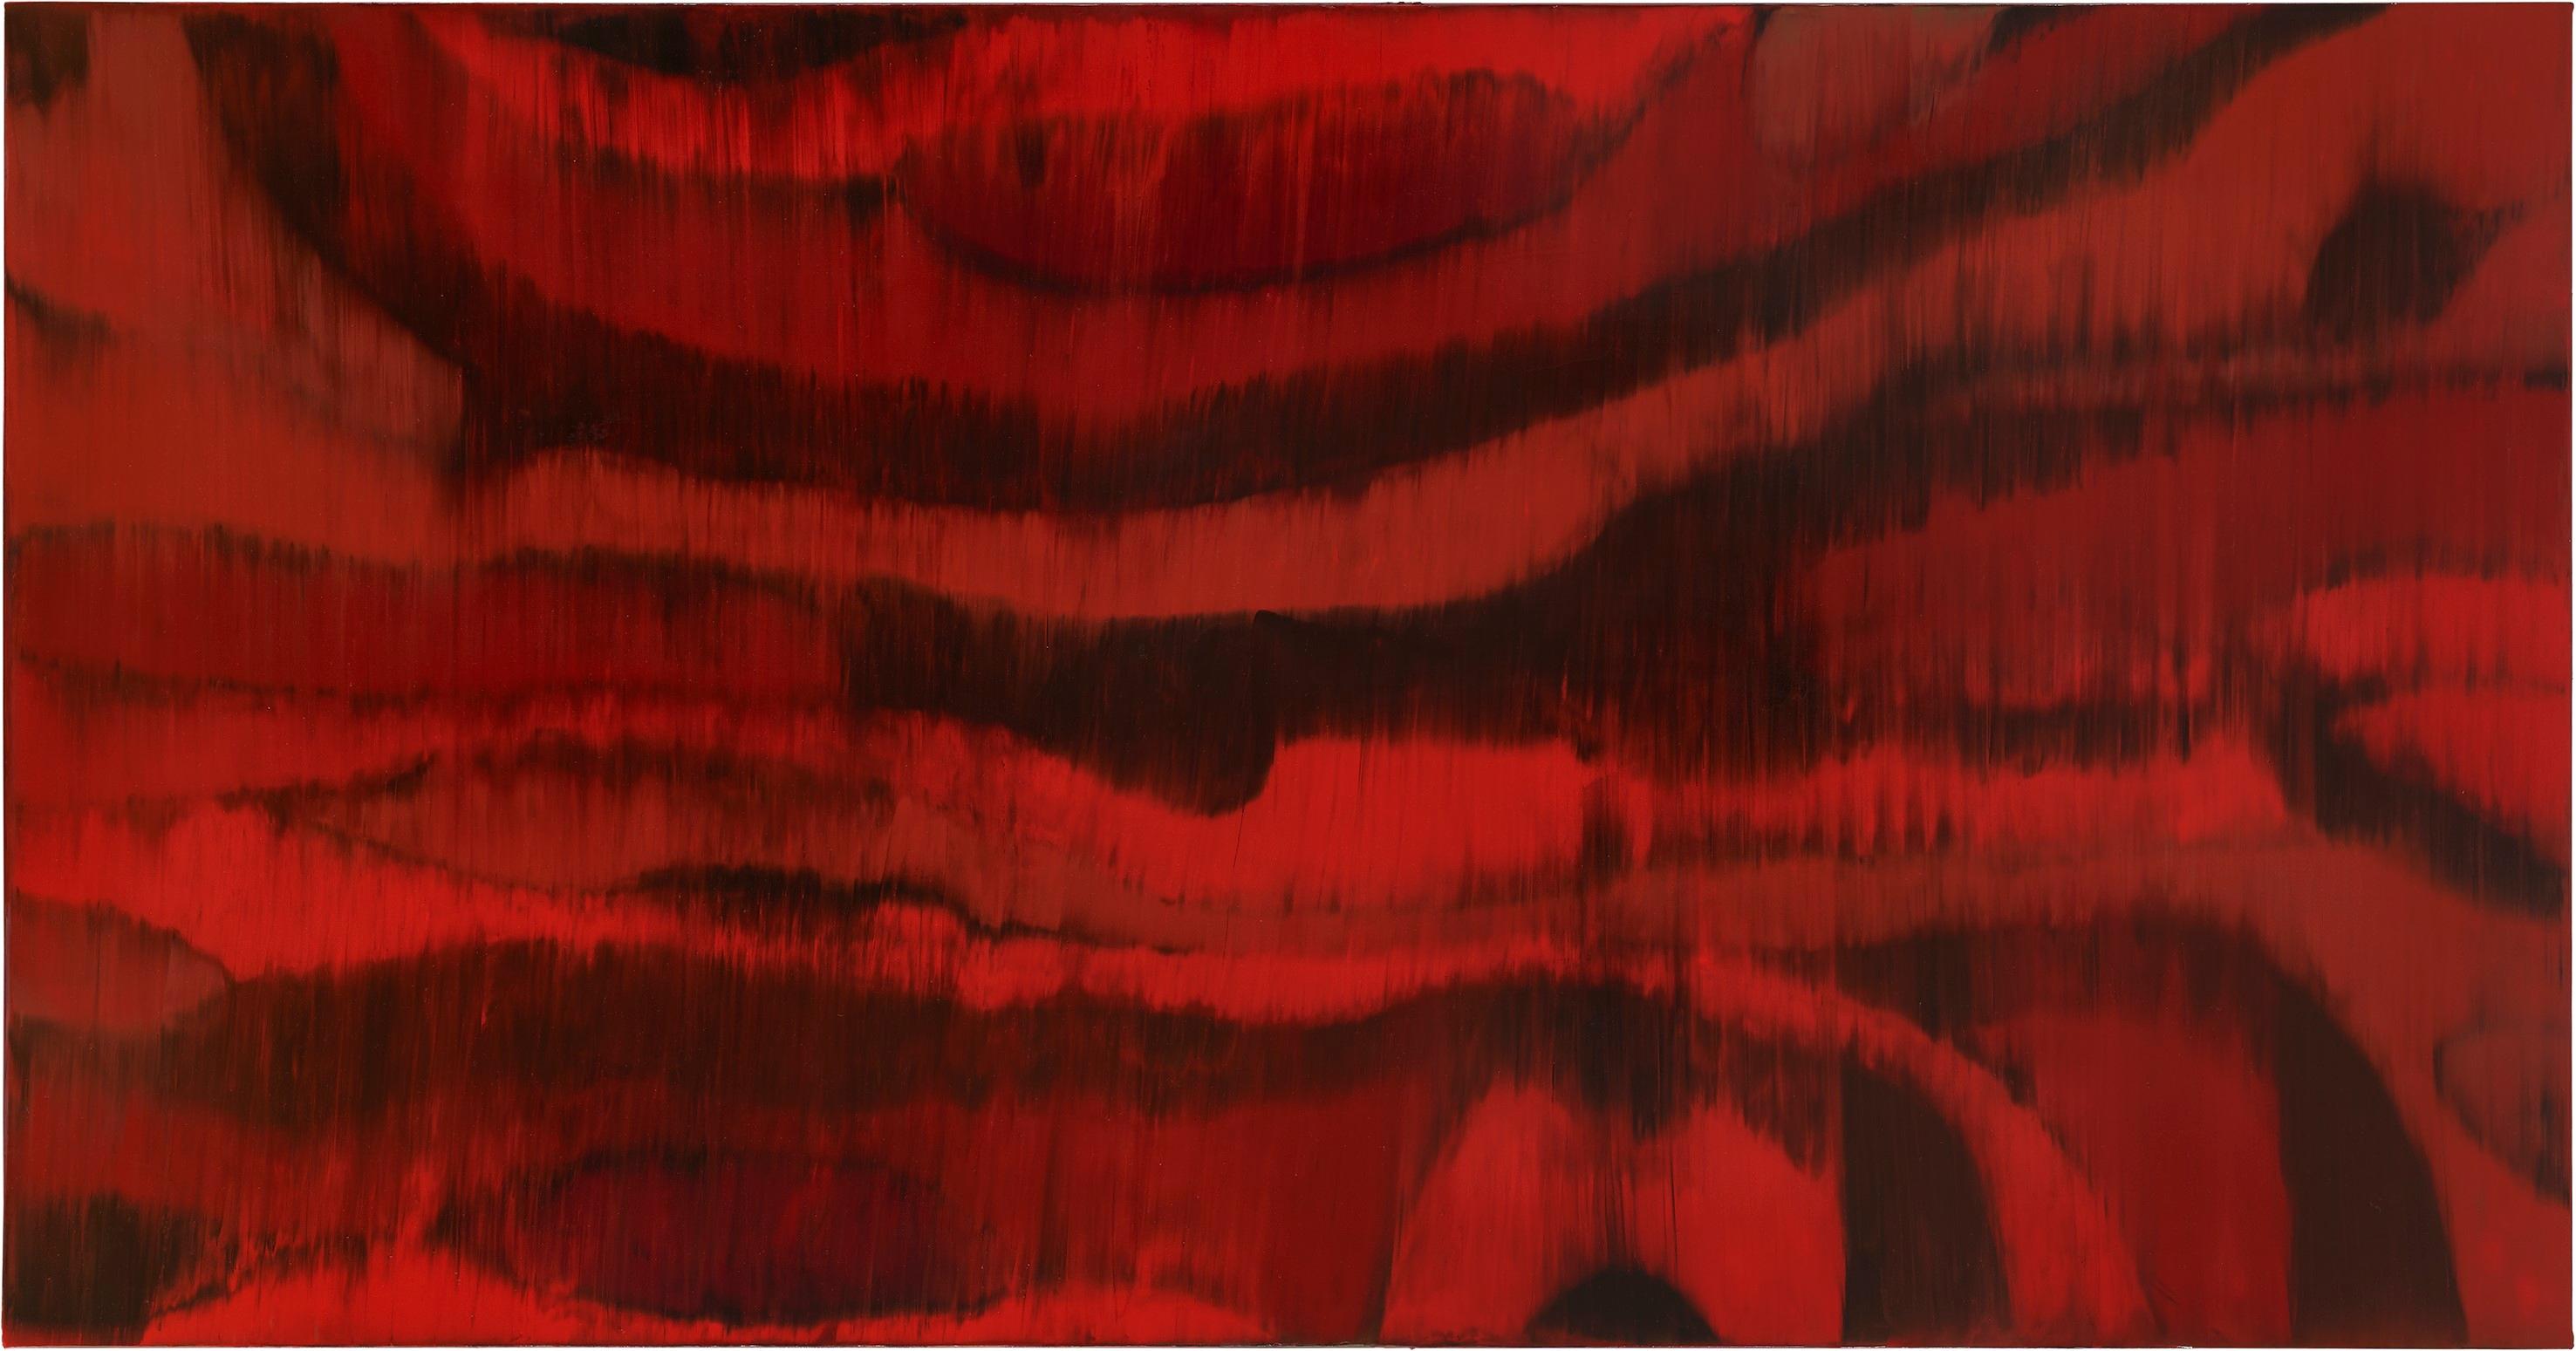 Heartbeat I, 2017
Encaustic, Beeswax, Oil on wooden panel (Signed on reverse)
41.33 H x 78.74 W in
105 H x 200 W cm

Pal B. Stock developed his unique technique using beeswax, oil paint on wood panel. Working with beeswax had a powerful magnetic